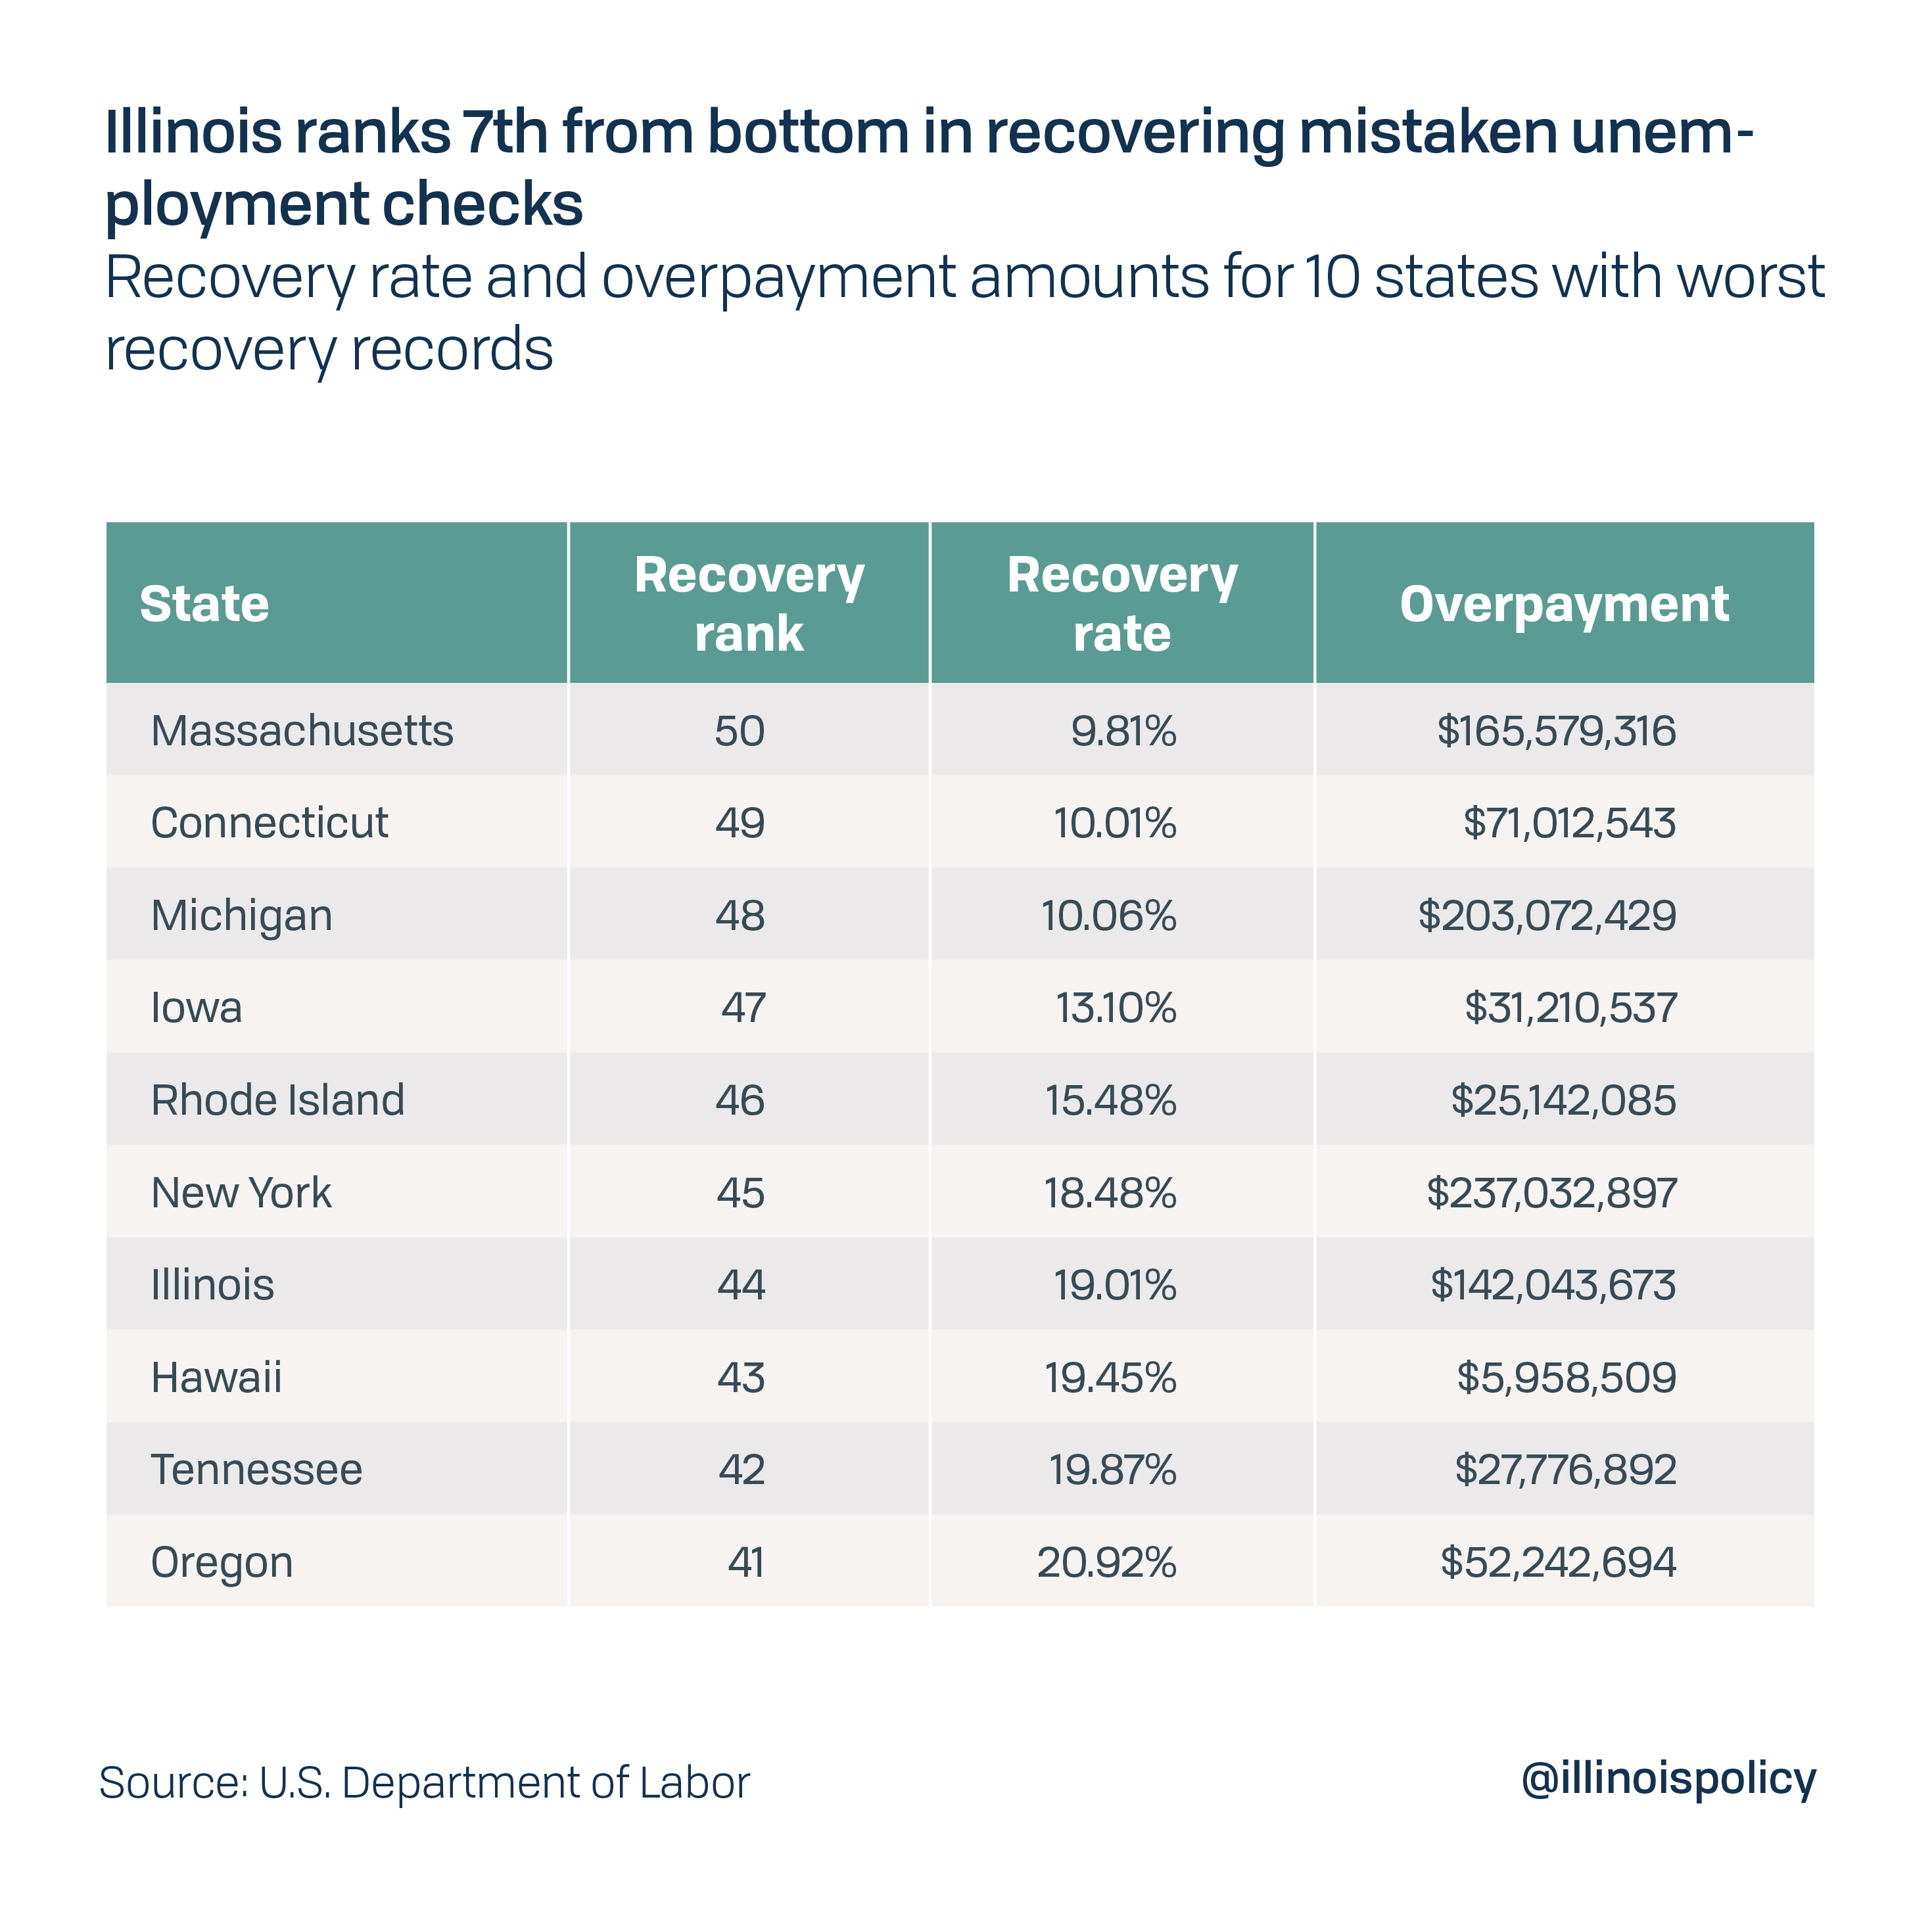 Illinois ranks 7th from bottom in recovering mistaken unemployment checks